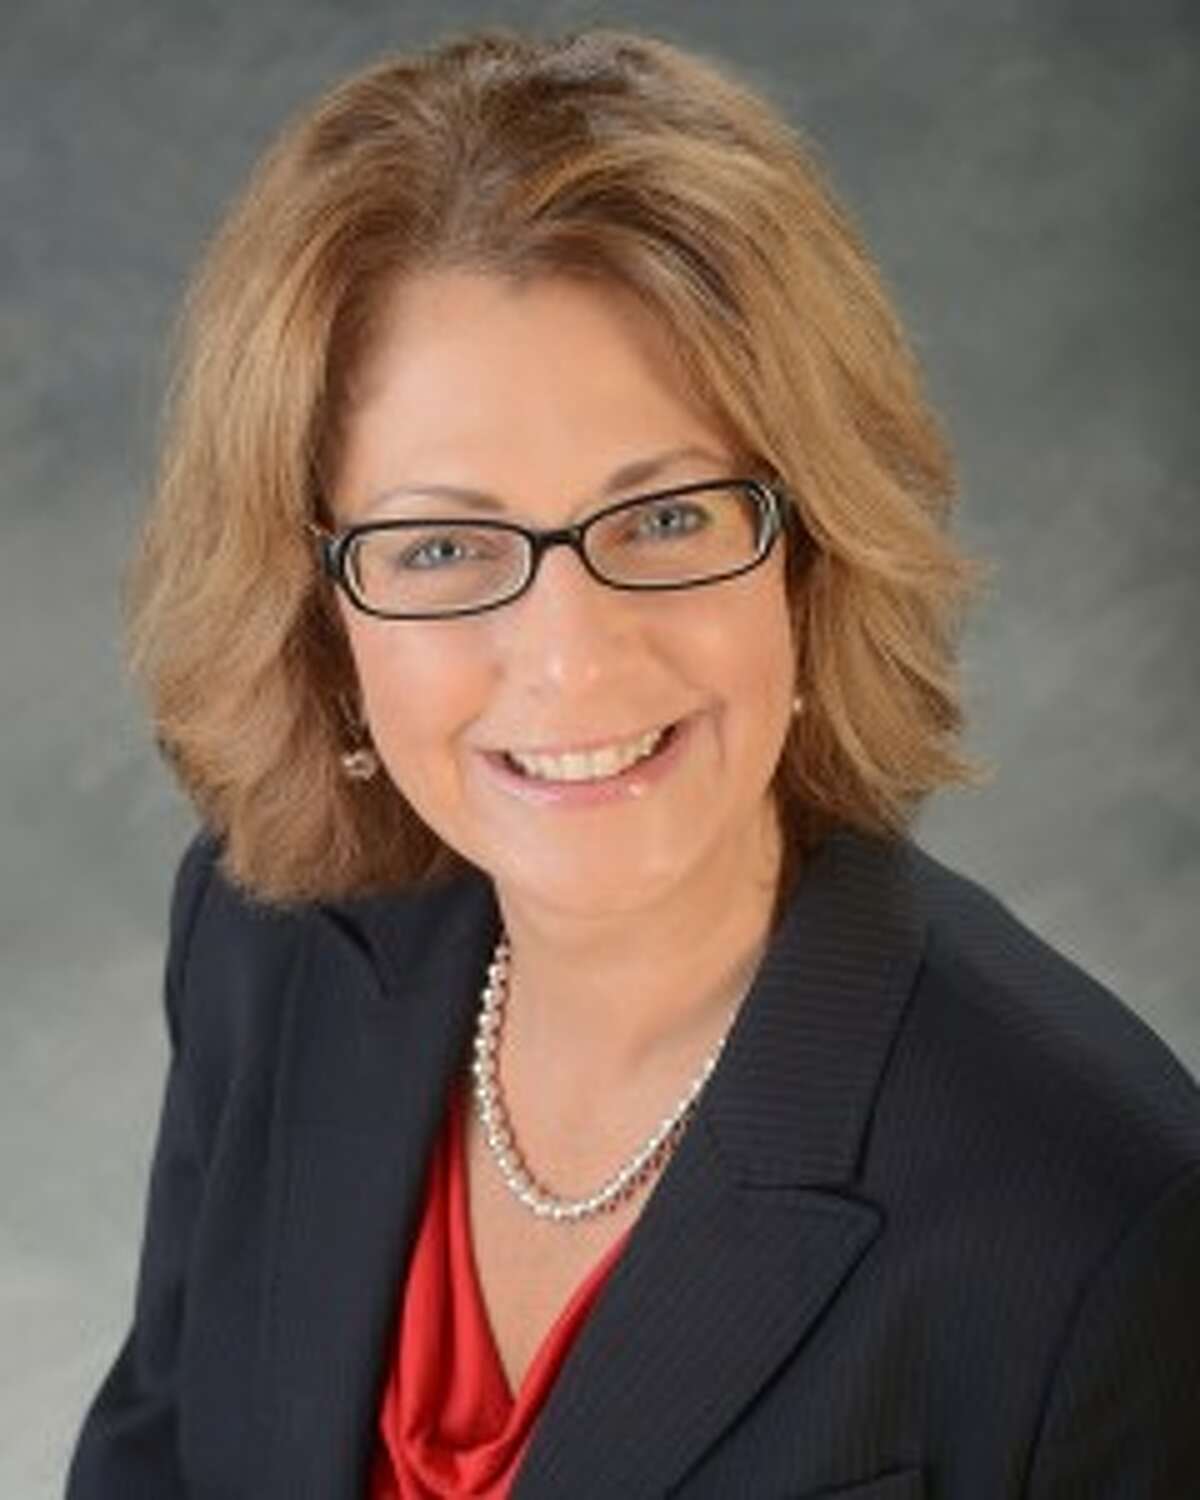 Saratoga Springs Commissioner of Finance Michele Madigan, who is in her fourth term, lost her primary bid.